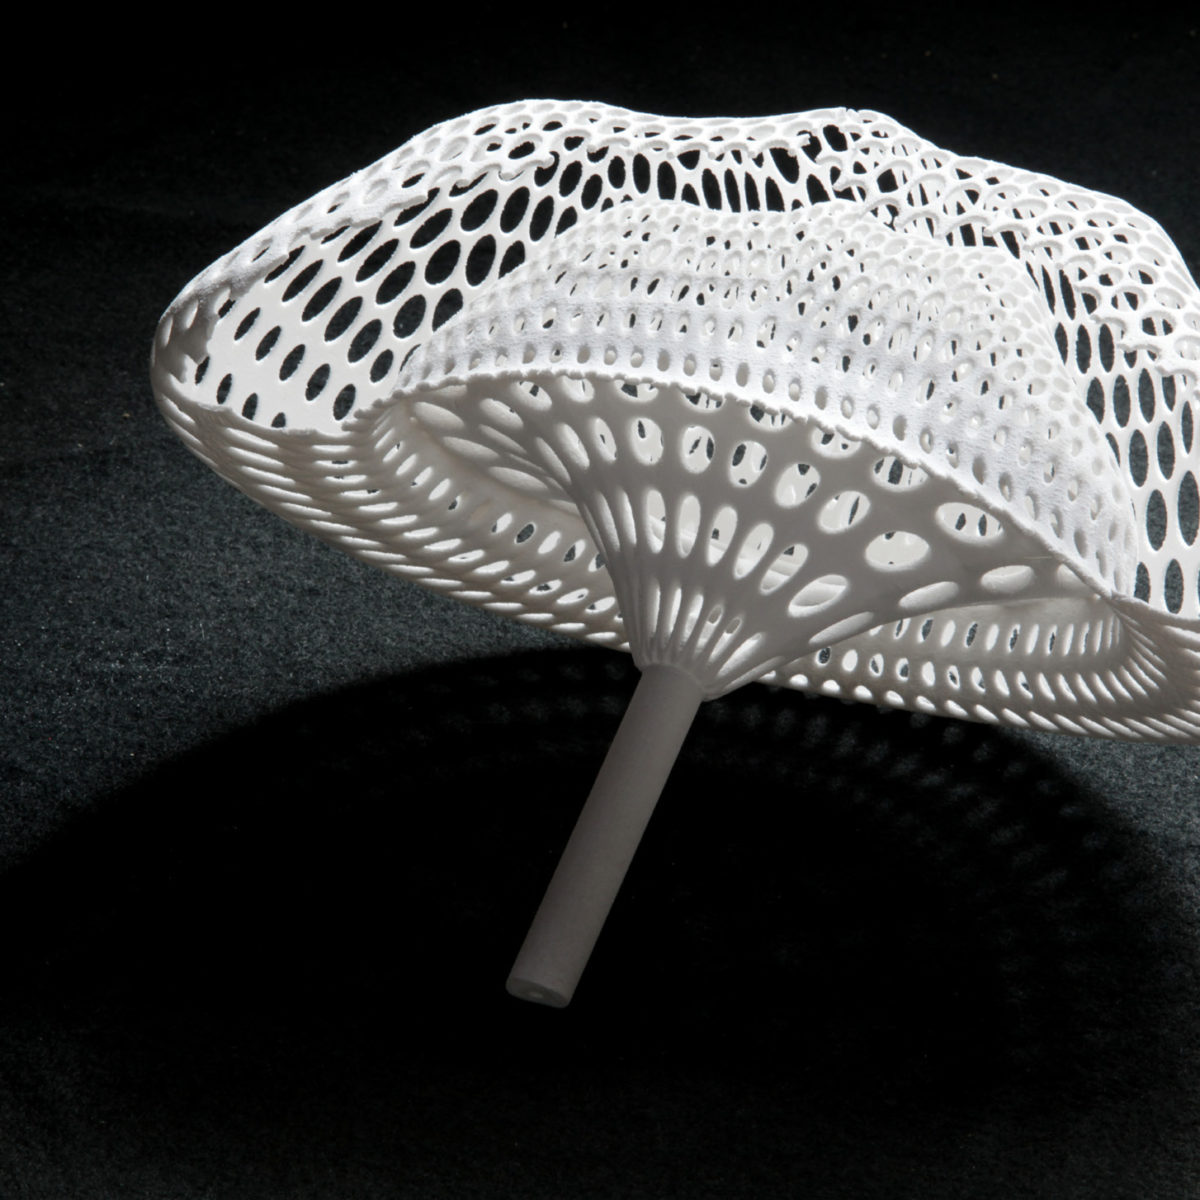 Overcast - Guan Lee, Mamou-Mani - 3D Printed Cloudlets Ceiling Installation - One module of a cloudlet